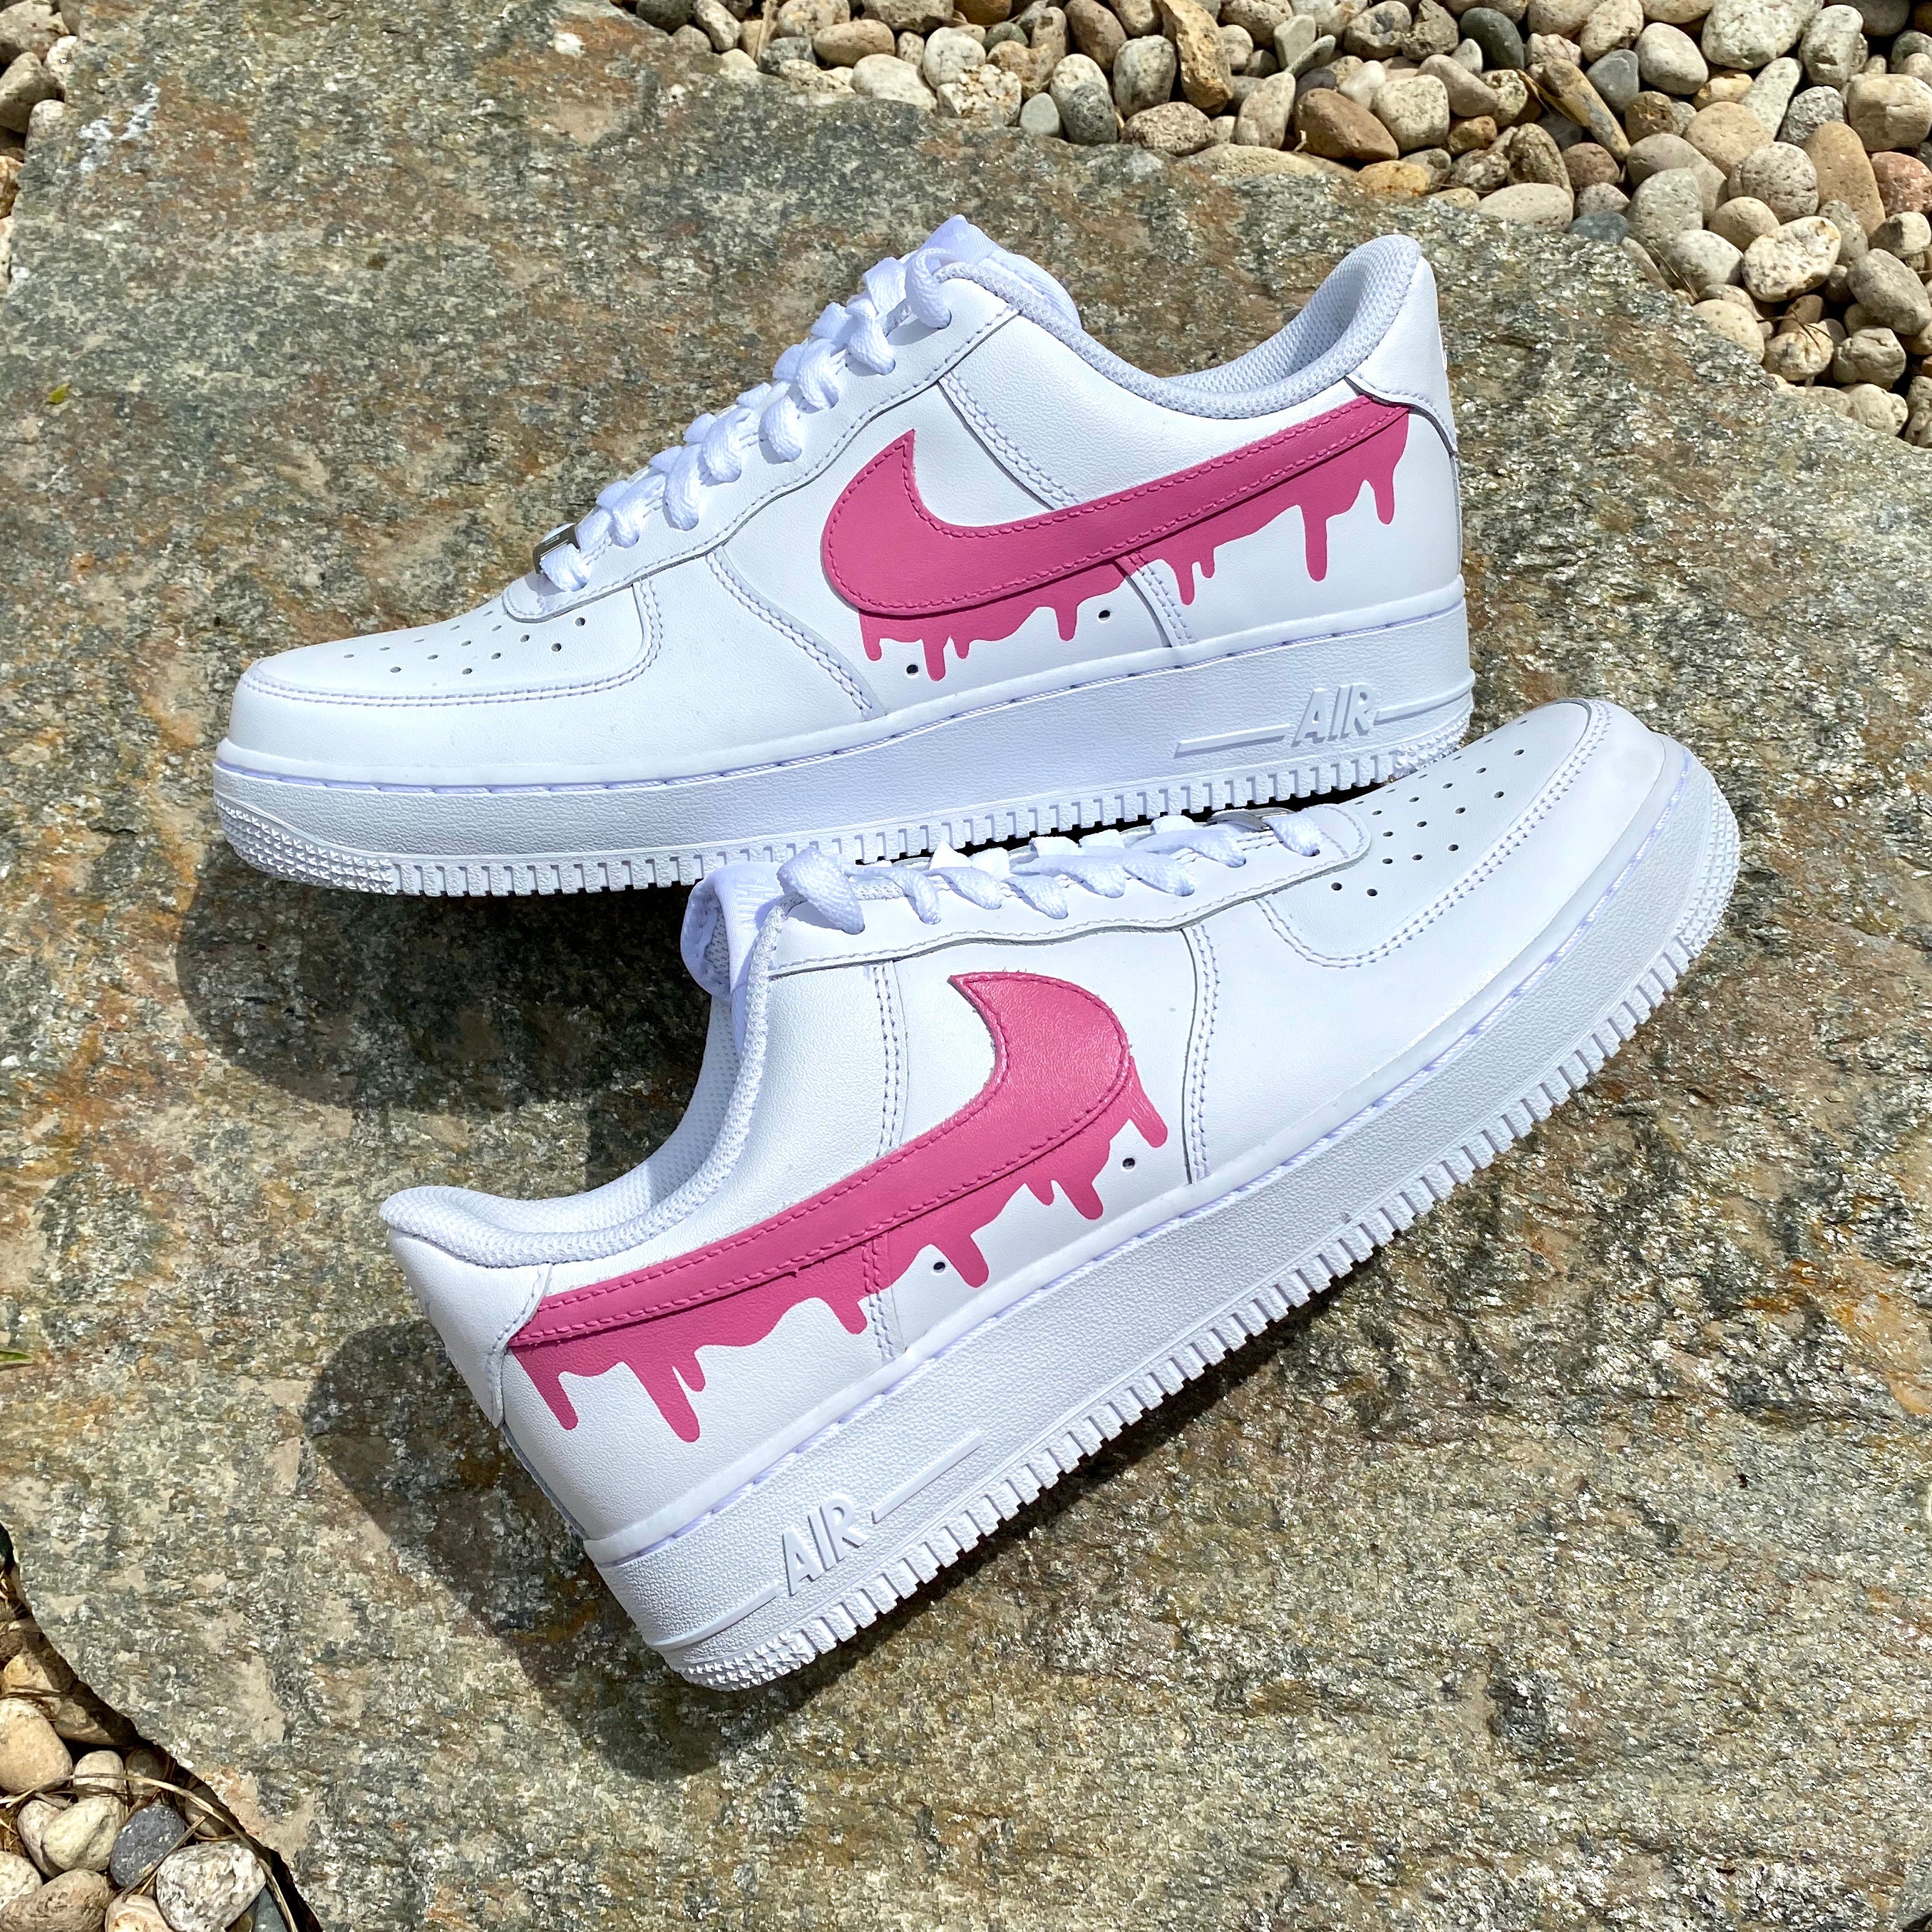 Reflective Drip Air Force 1  Nike air shoes, Sneakers, Nike shoes